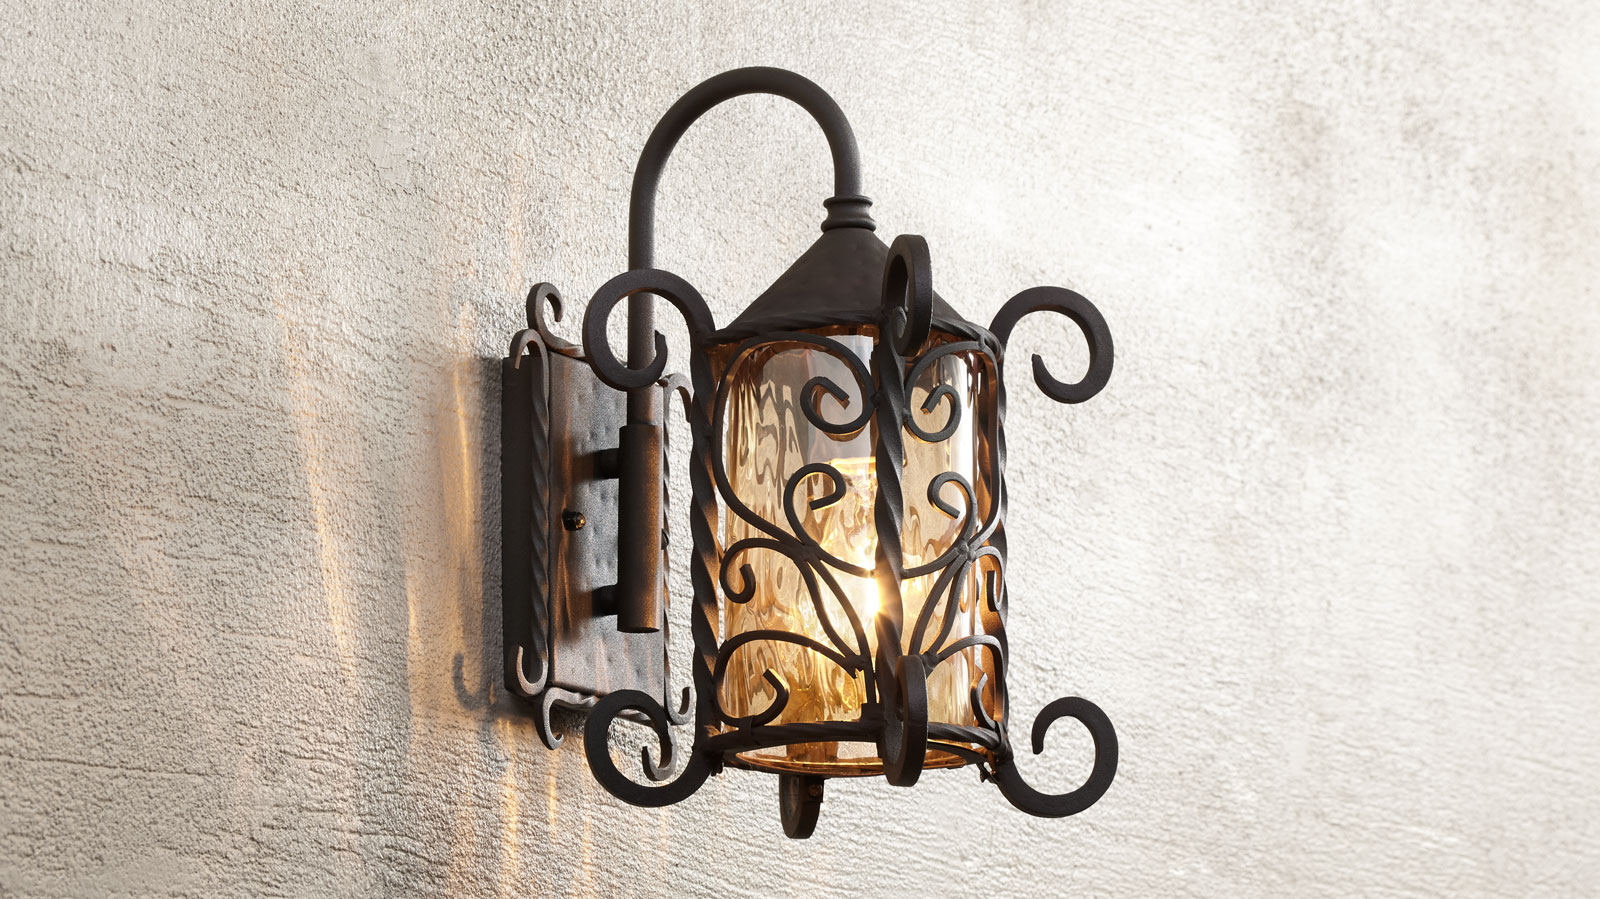 Lighting Ideas For a Spanish Style Home - Ideas & Advice | Lamps ...